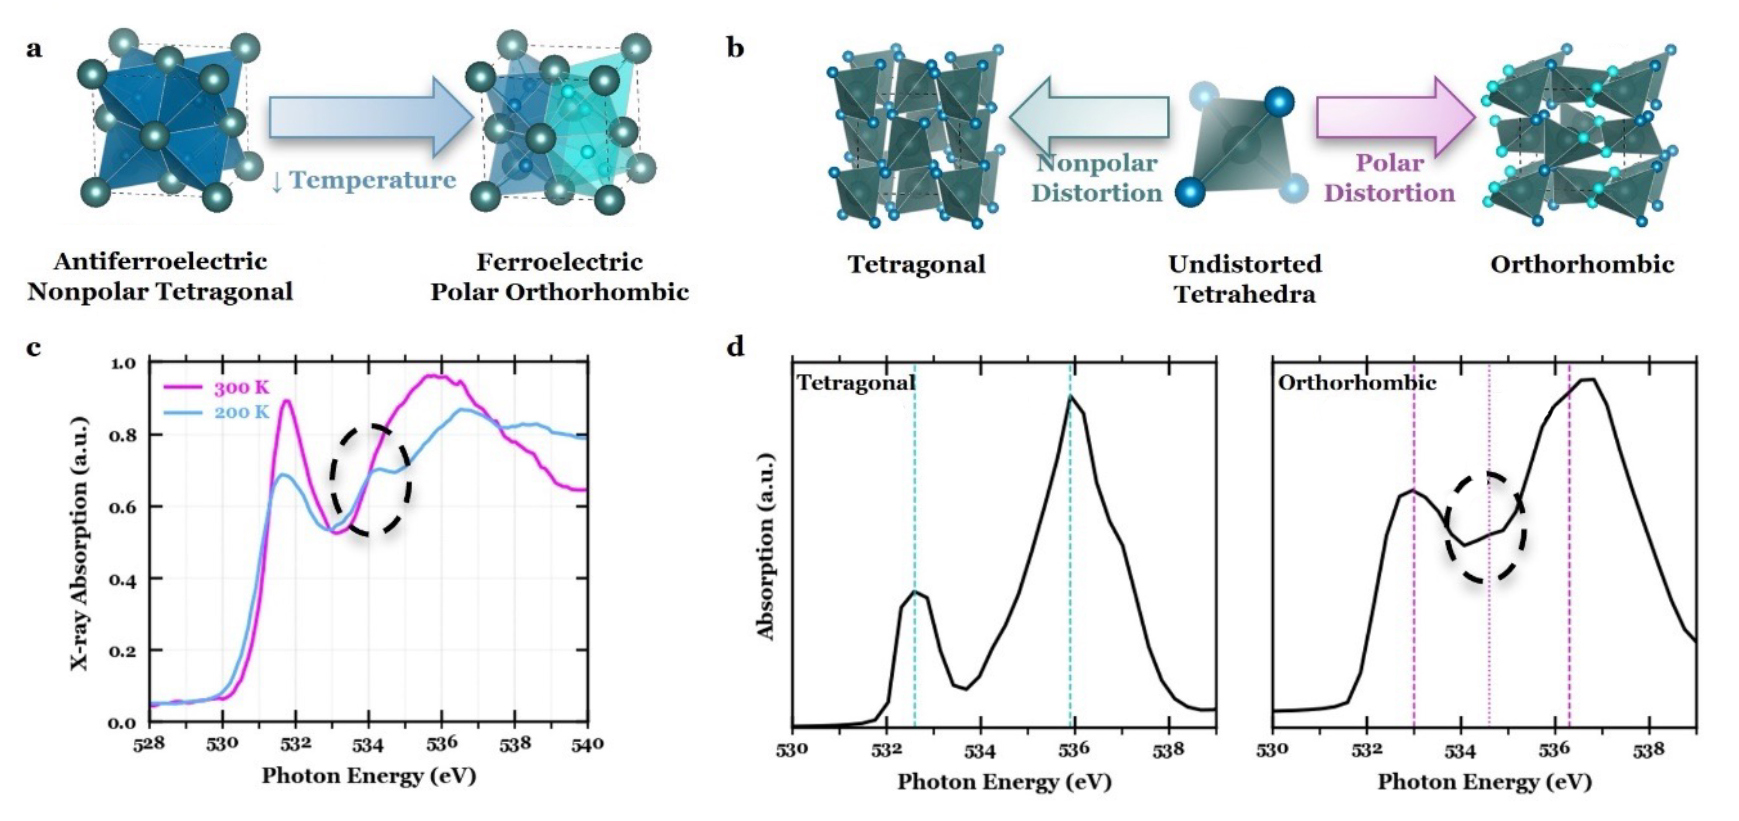 (a-b) Ball-and-stick representations antiferroelectric and ferroelectric structures. (c-d) Three XAS spectra with dotted oval highlighting the signature of the ferroelectric phase.